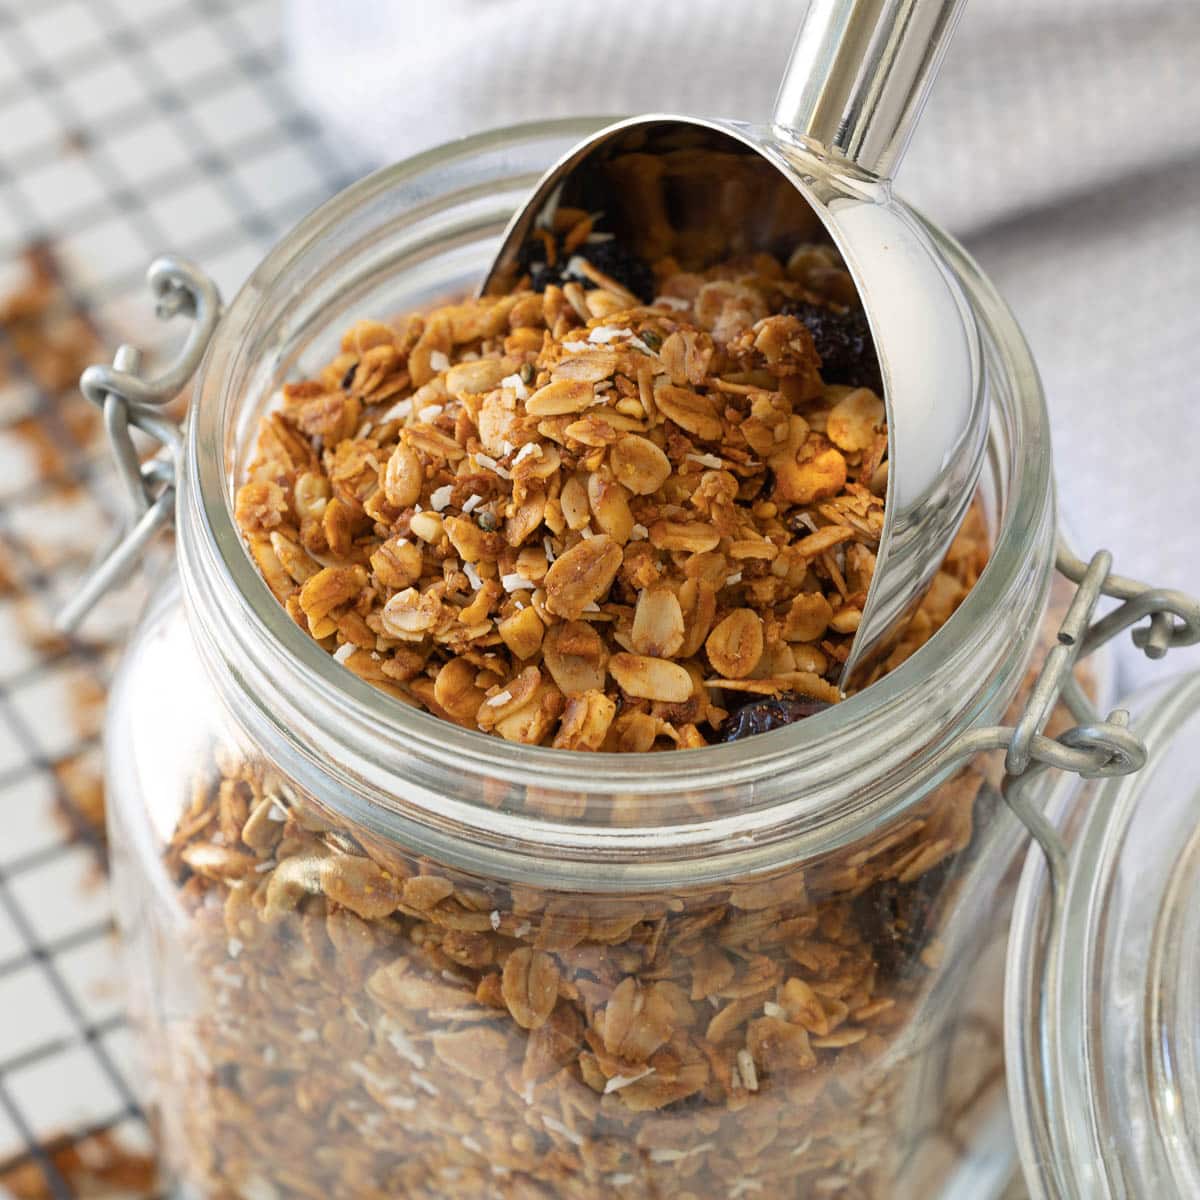 A close up of an open jar of homemade granola with a silver scoop.